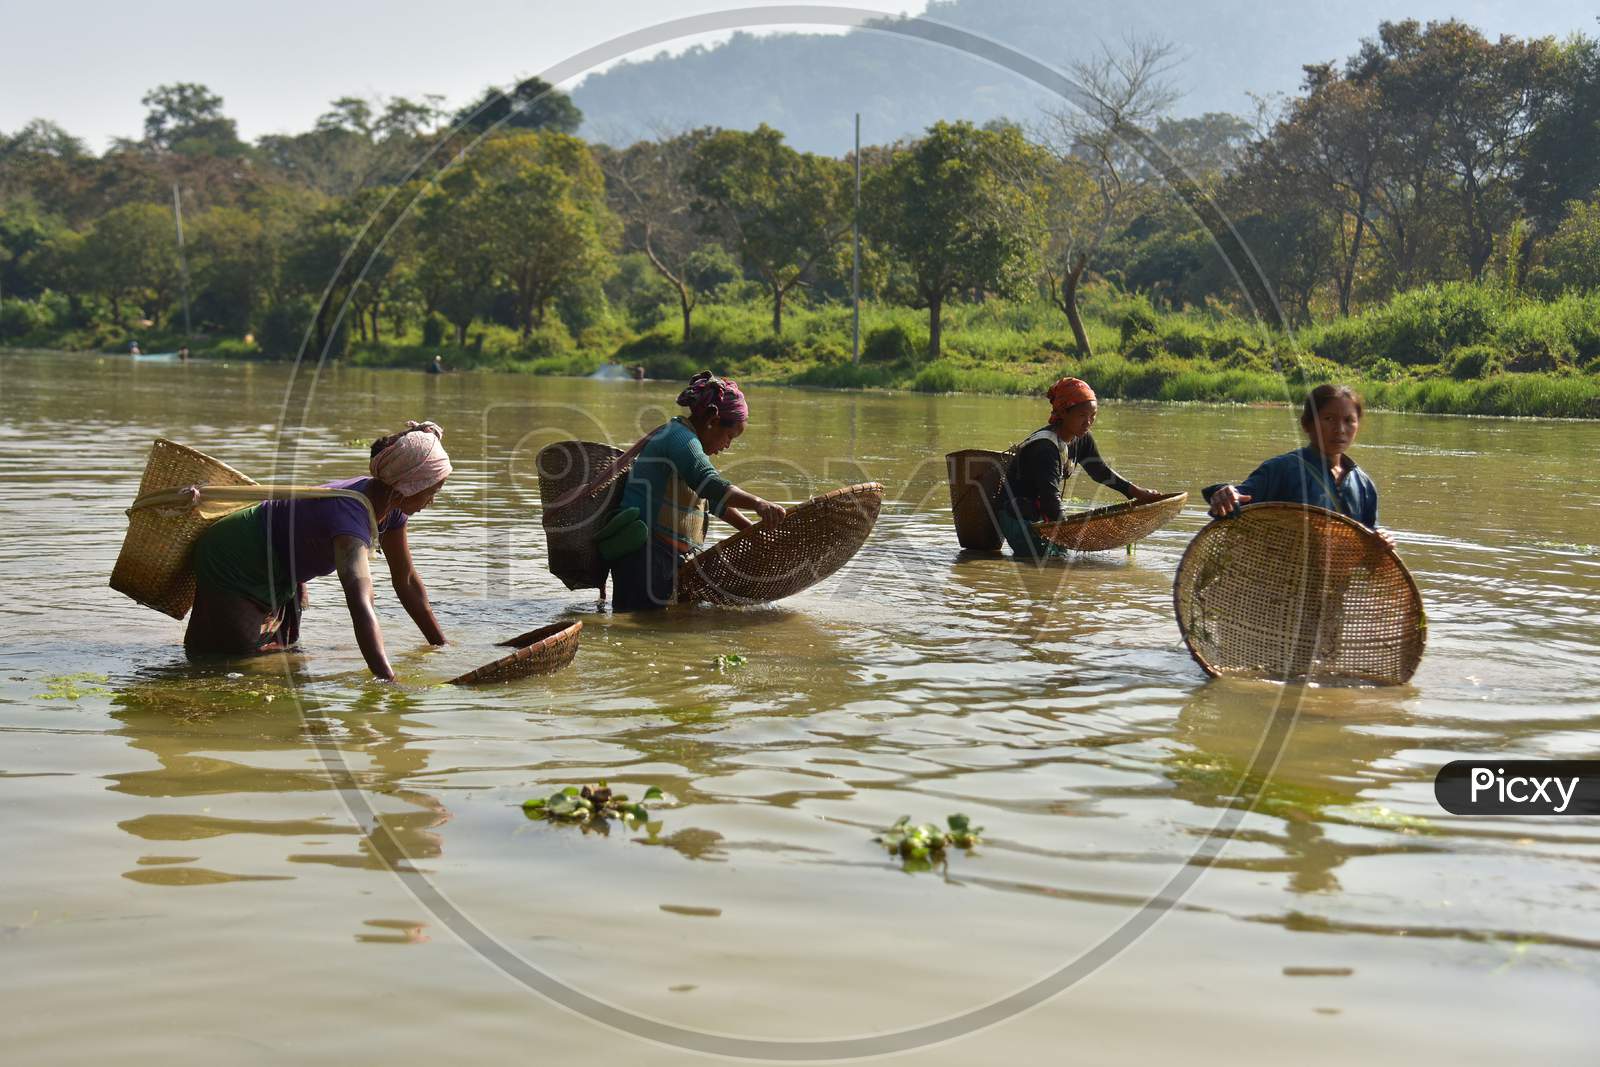 Women of Karbi tribe use traditional method to catch fishes in shallow waters at Burapahar near Kaziranga in Assam on Dec 28,2020.